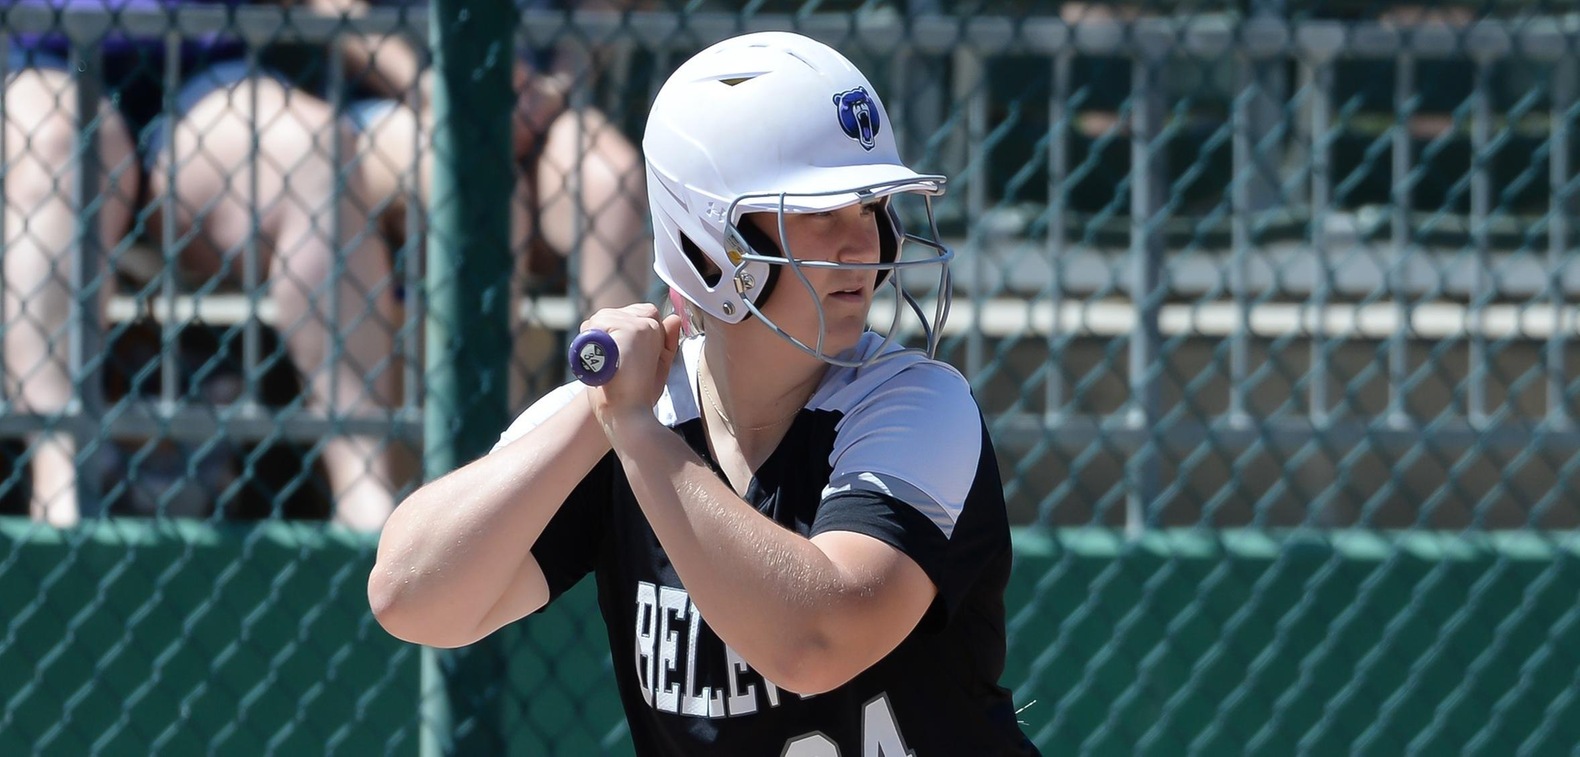 Emily Rochford led the Bruins offensively, going 2-for-3 with a double and an RBI.  